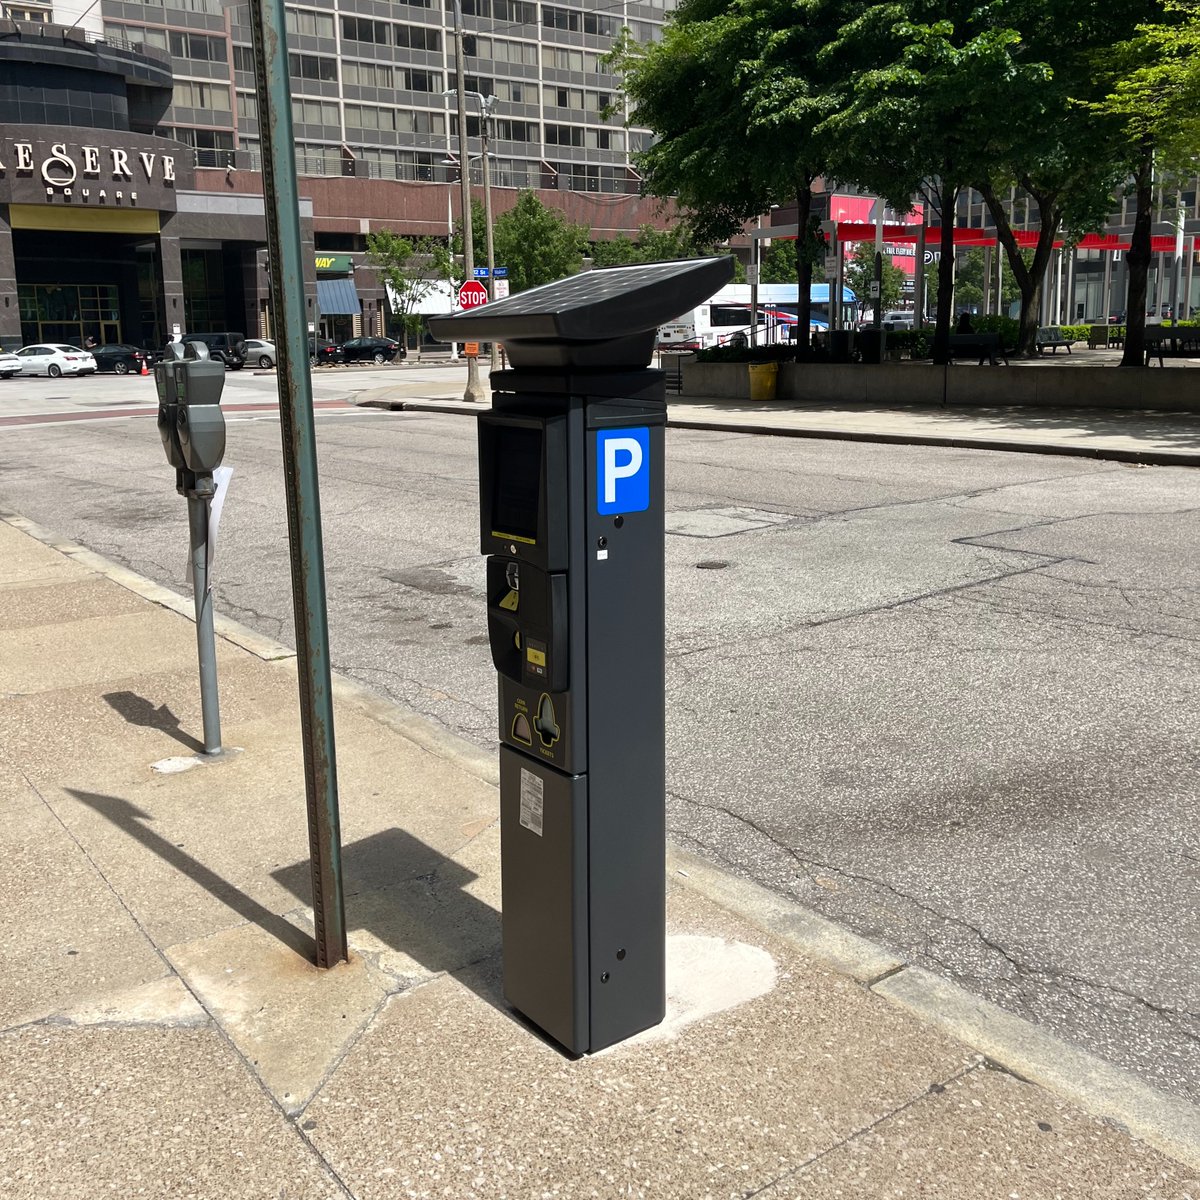 Start saying goodbye to parking meters! The installation of Multispace Pay Stations has begun. Coin-only meters will be replaced with pay stations. Parking fees can be paid at the pay station or through ParkMobile! Learn more: bit.ly/3UI6CVj